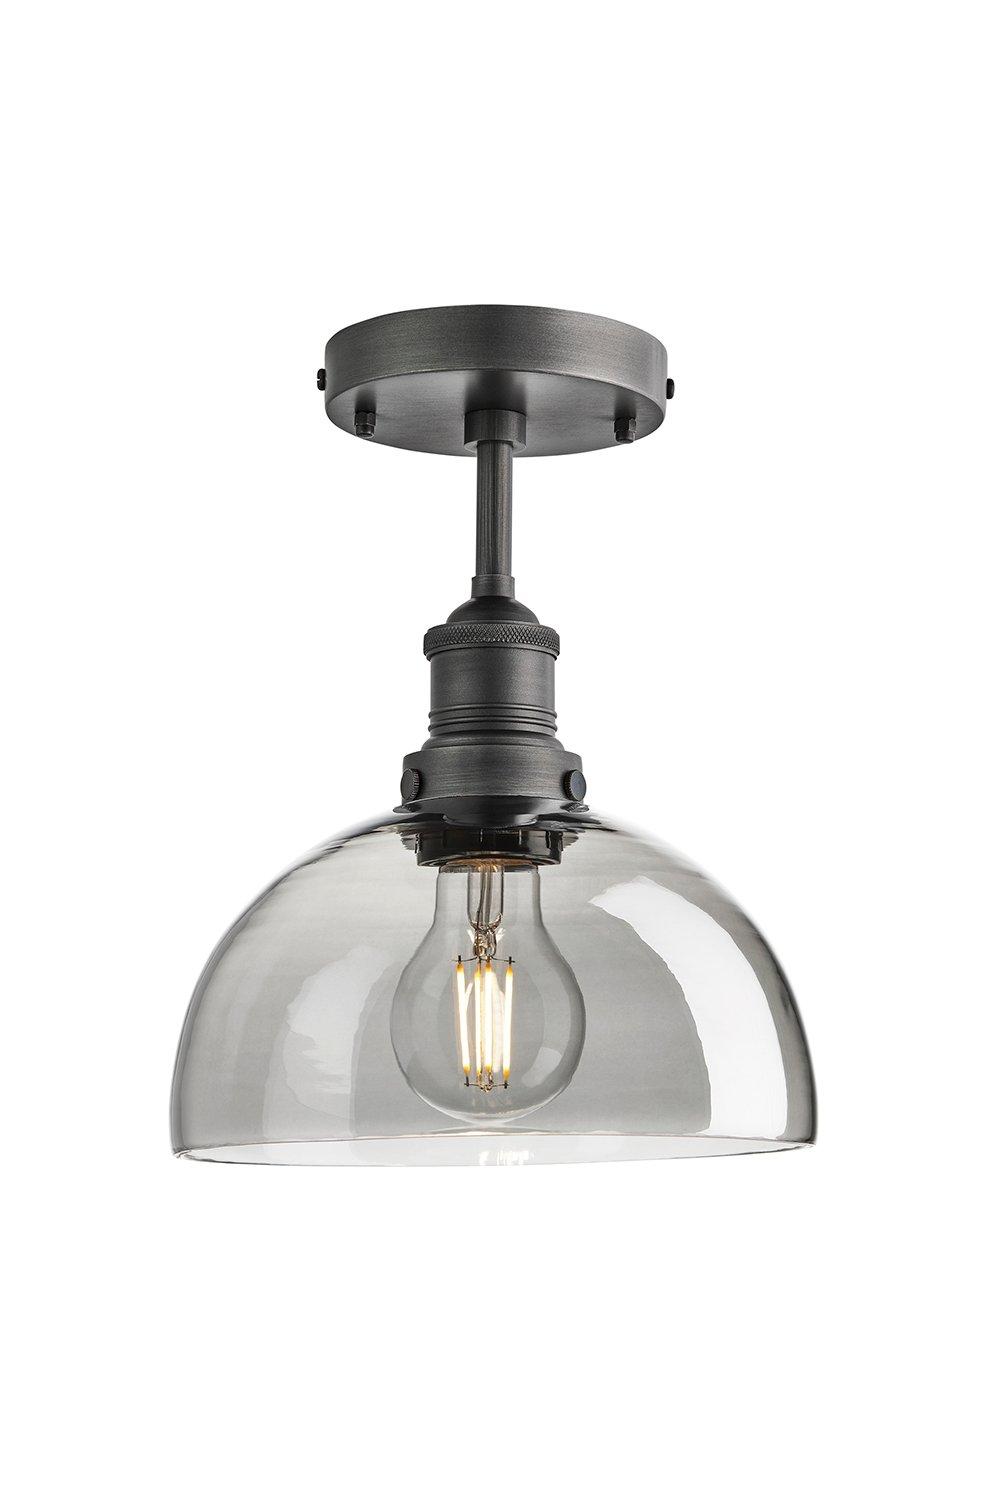 Brooklyn Tinted Glass Dome Flush Mount, 8 Inch, Smoke Grey, Pewter Holder